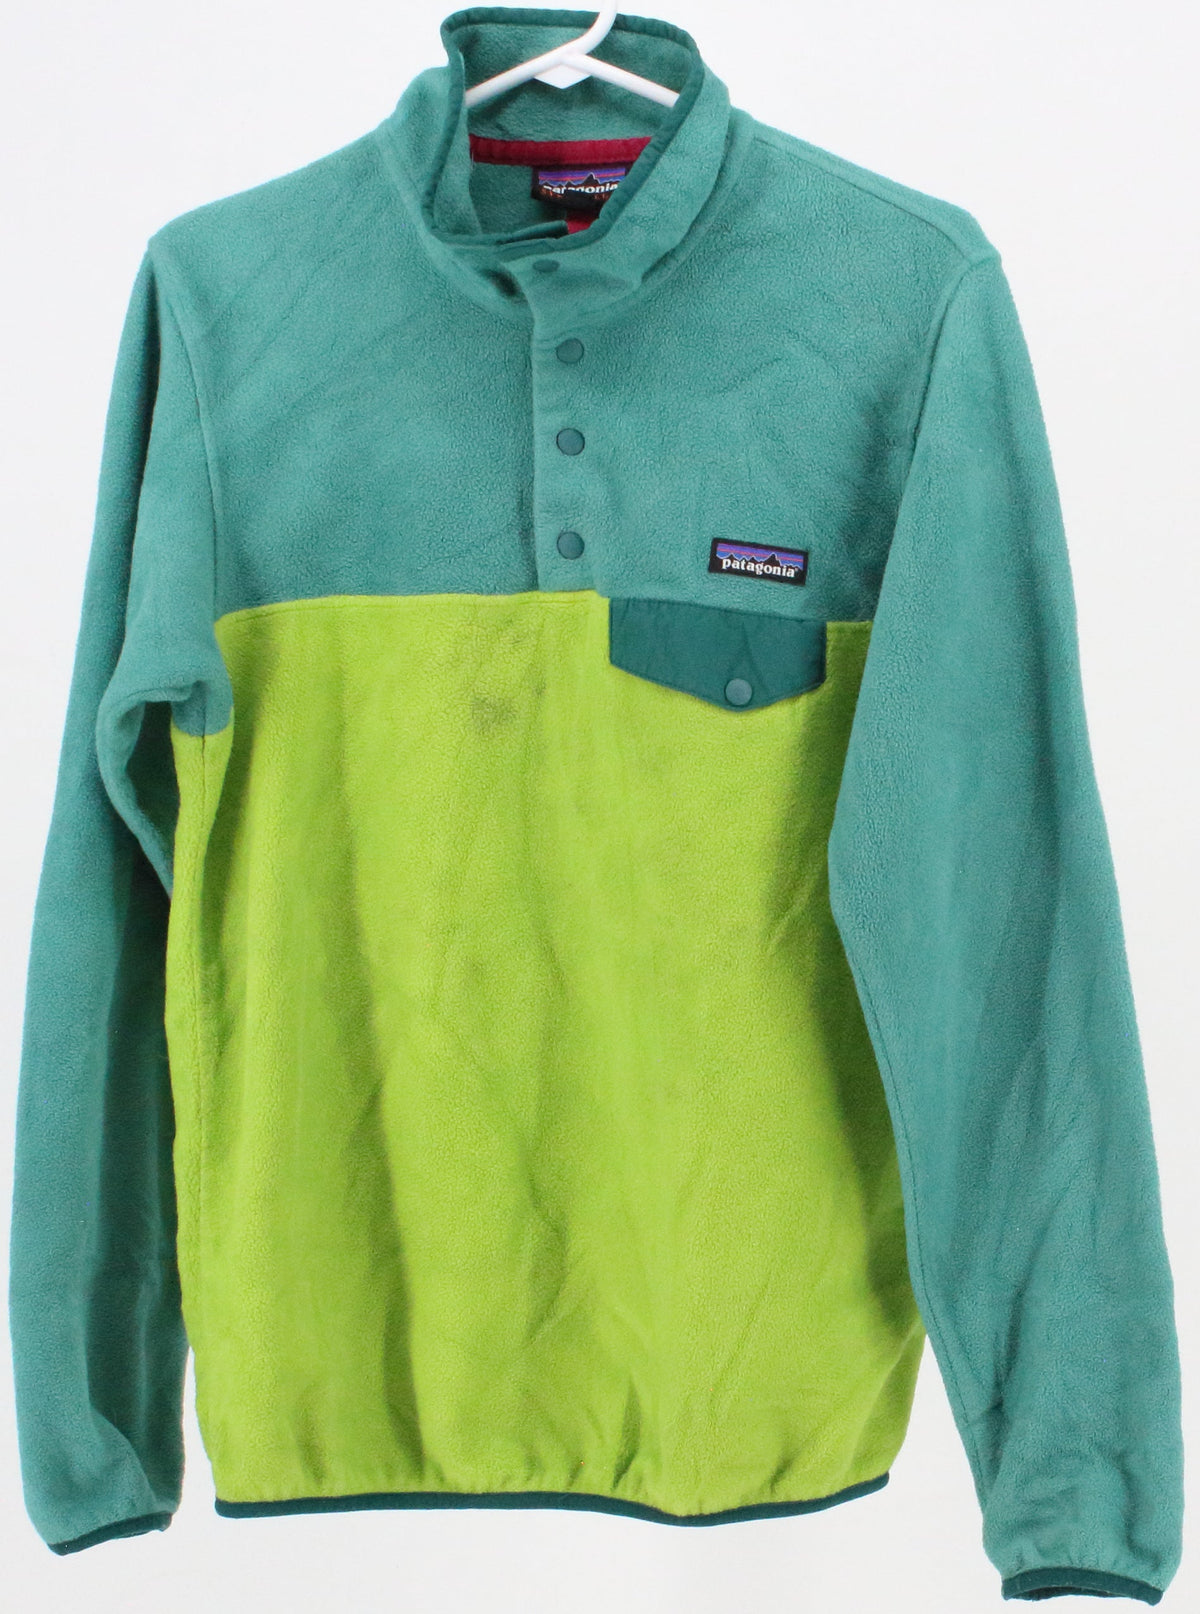 Patagonia Synchilla Green and Lime Green Pocket Fleece